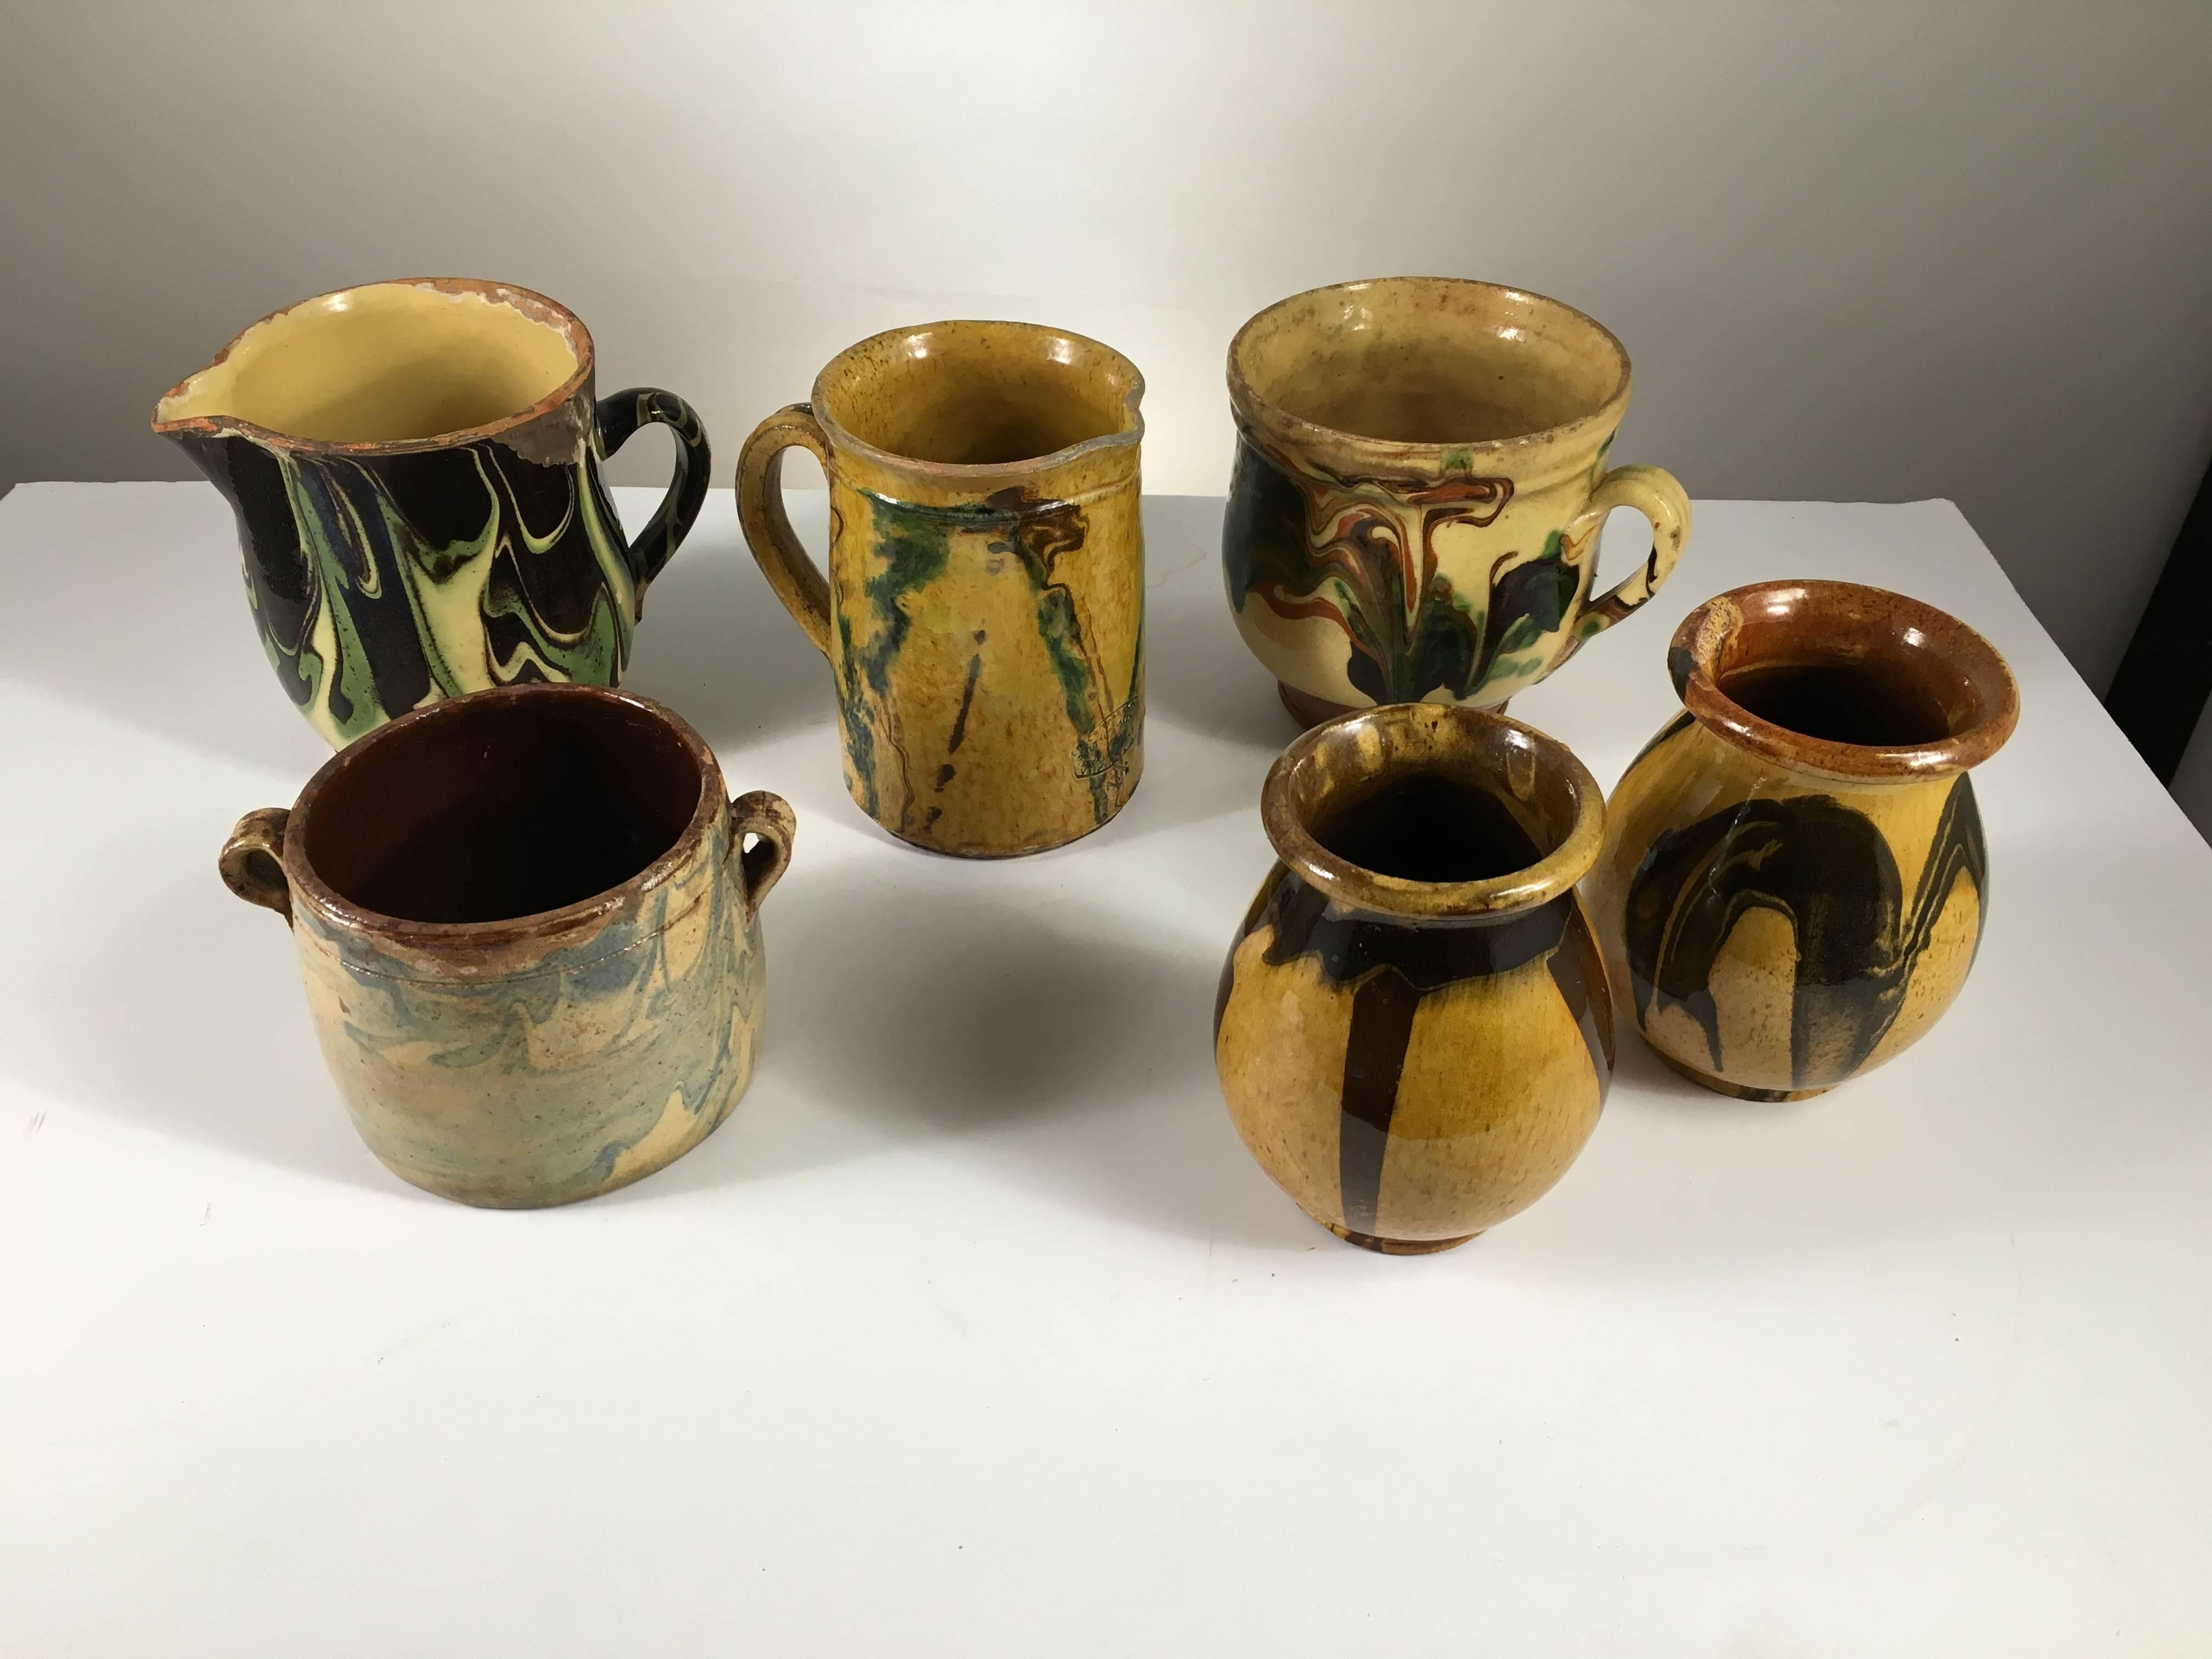 A nice collection of French six provincial Jaspe pots and pitchers from the Savoire region, late 19th century, from the collection of Pierre Moulin, author of French Country style books and founder of the Pierre Deux shops.